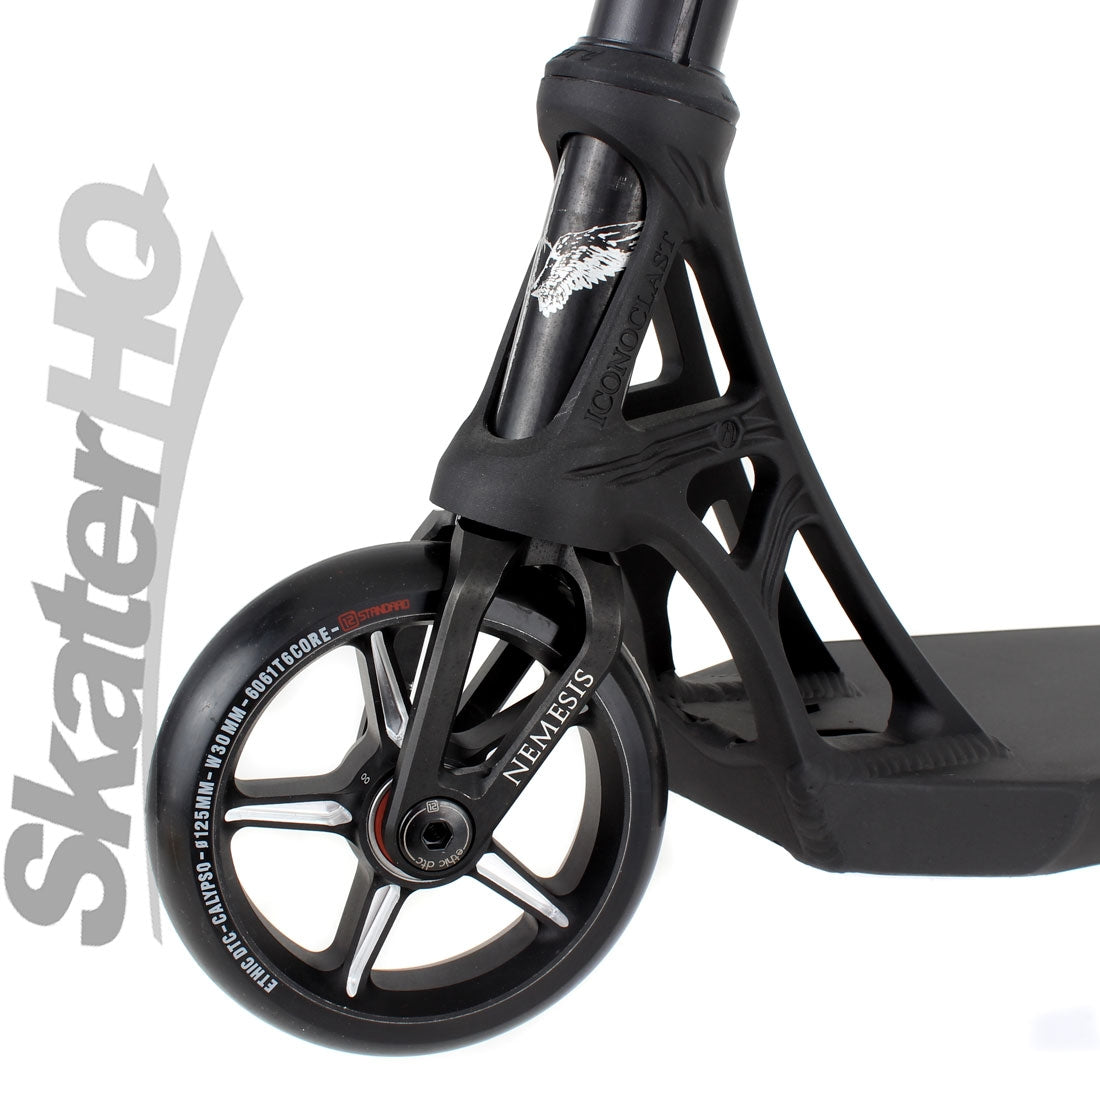 Ethic 12 Standard Scooter Pack - Black Scooter Hardware and Parts